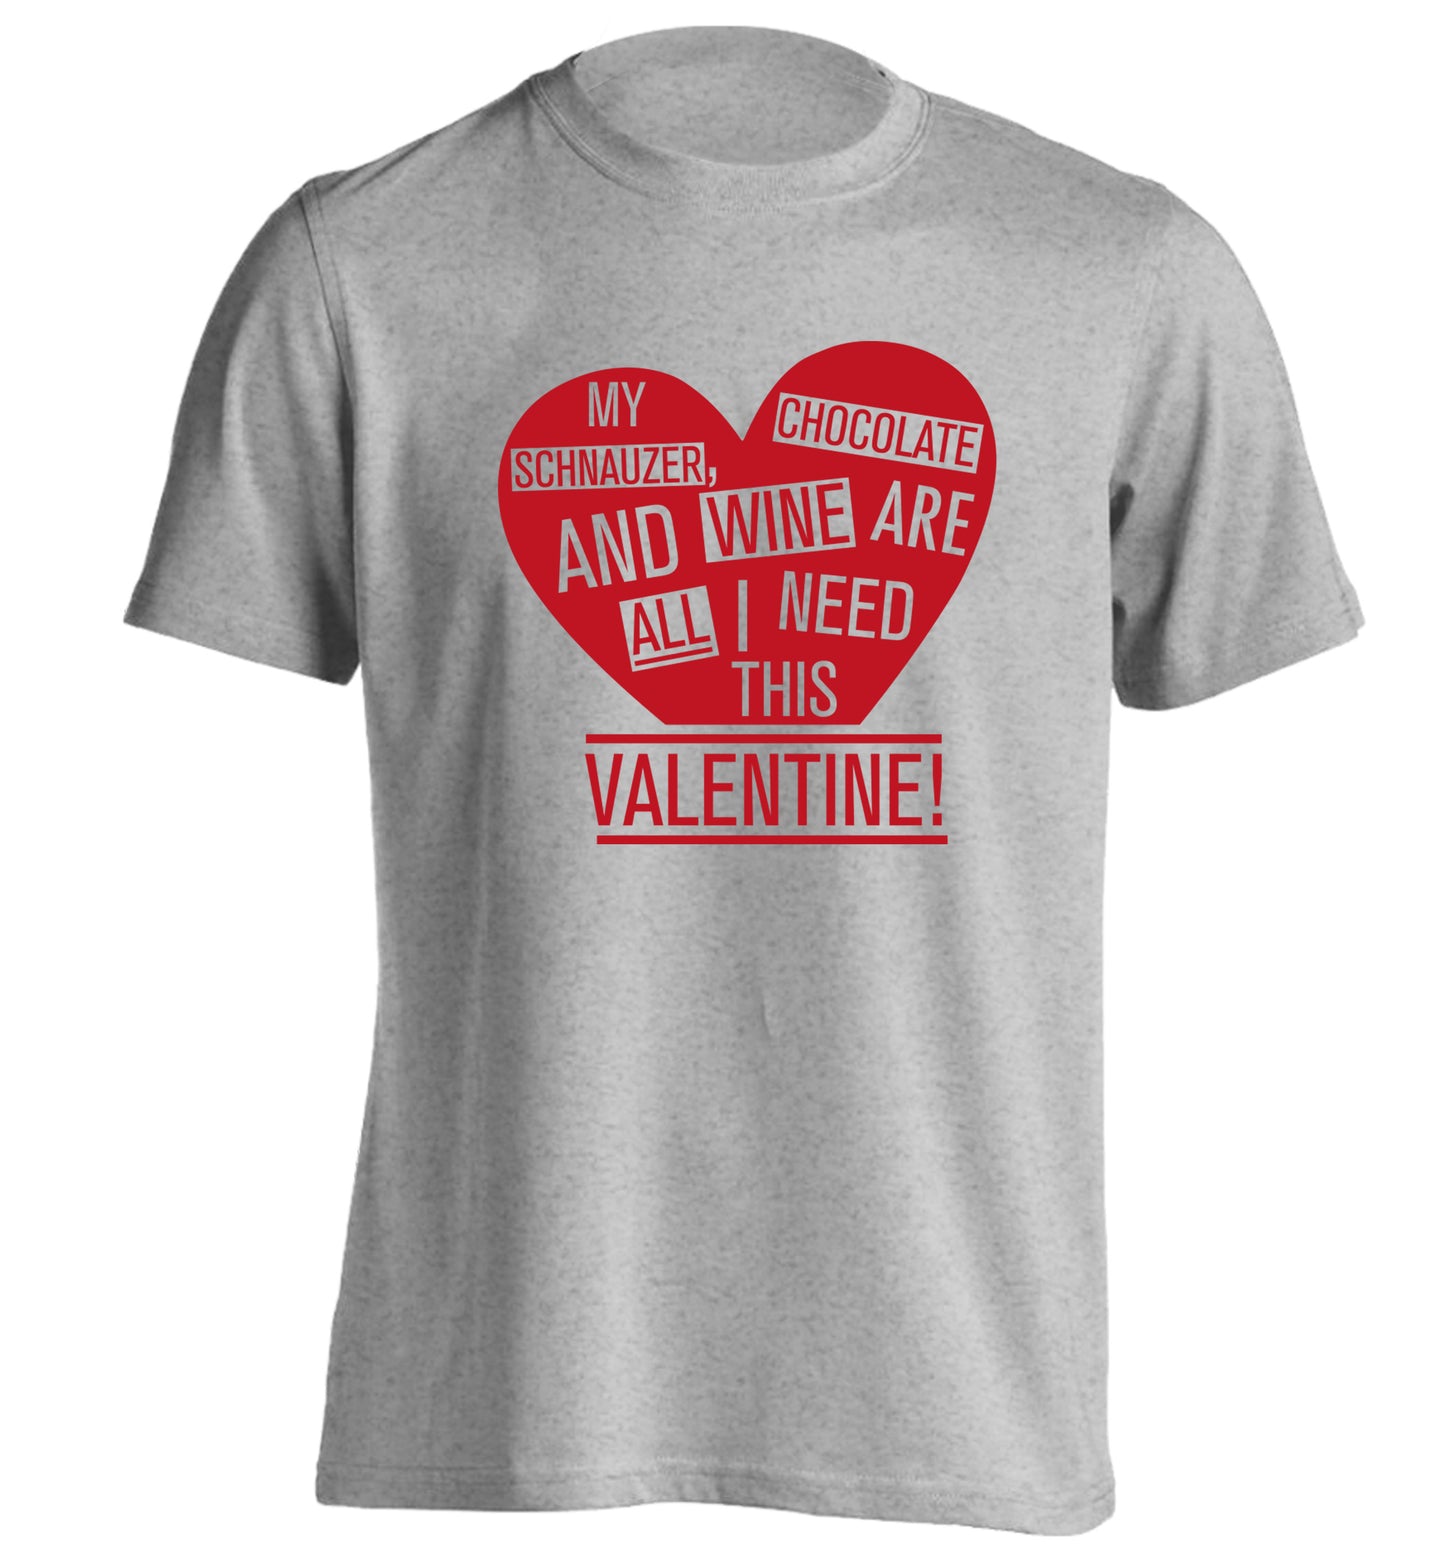 My schnauzer, chocolate and wine are all I need this valentine! adults unisex grey Tshirt 2XL